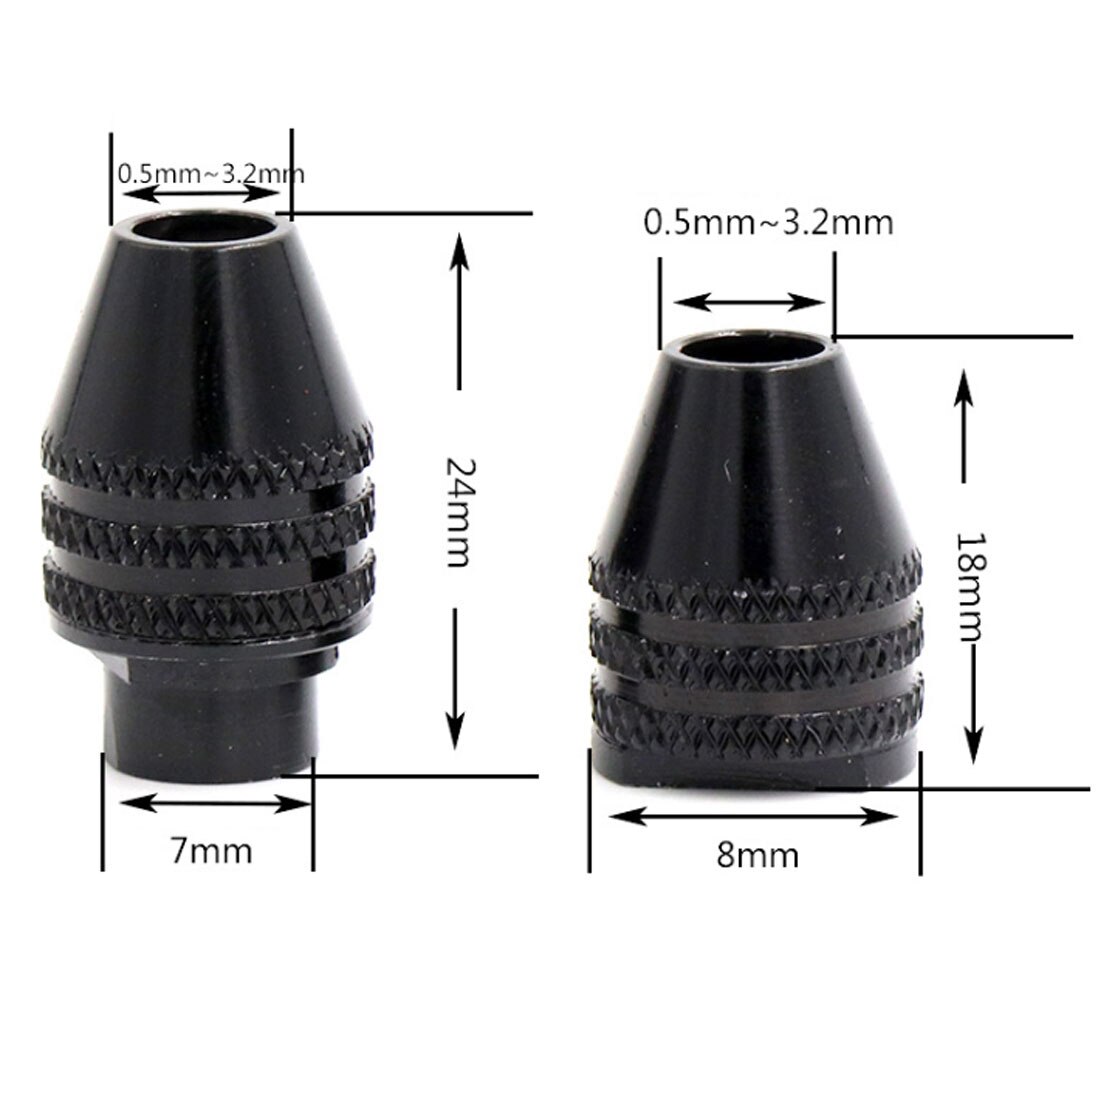 M8x0.75 Electric Grinding Universal Collet Chuck For Dremel Rotary